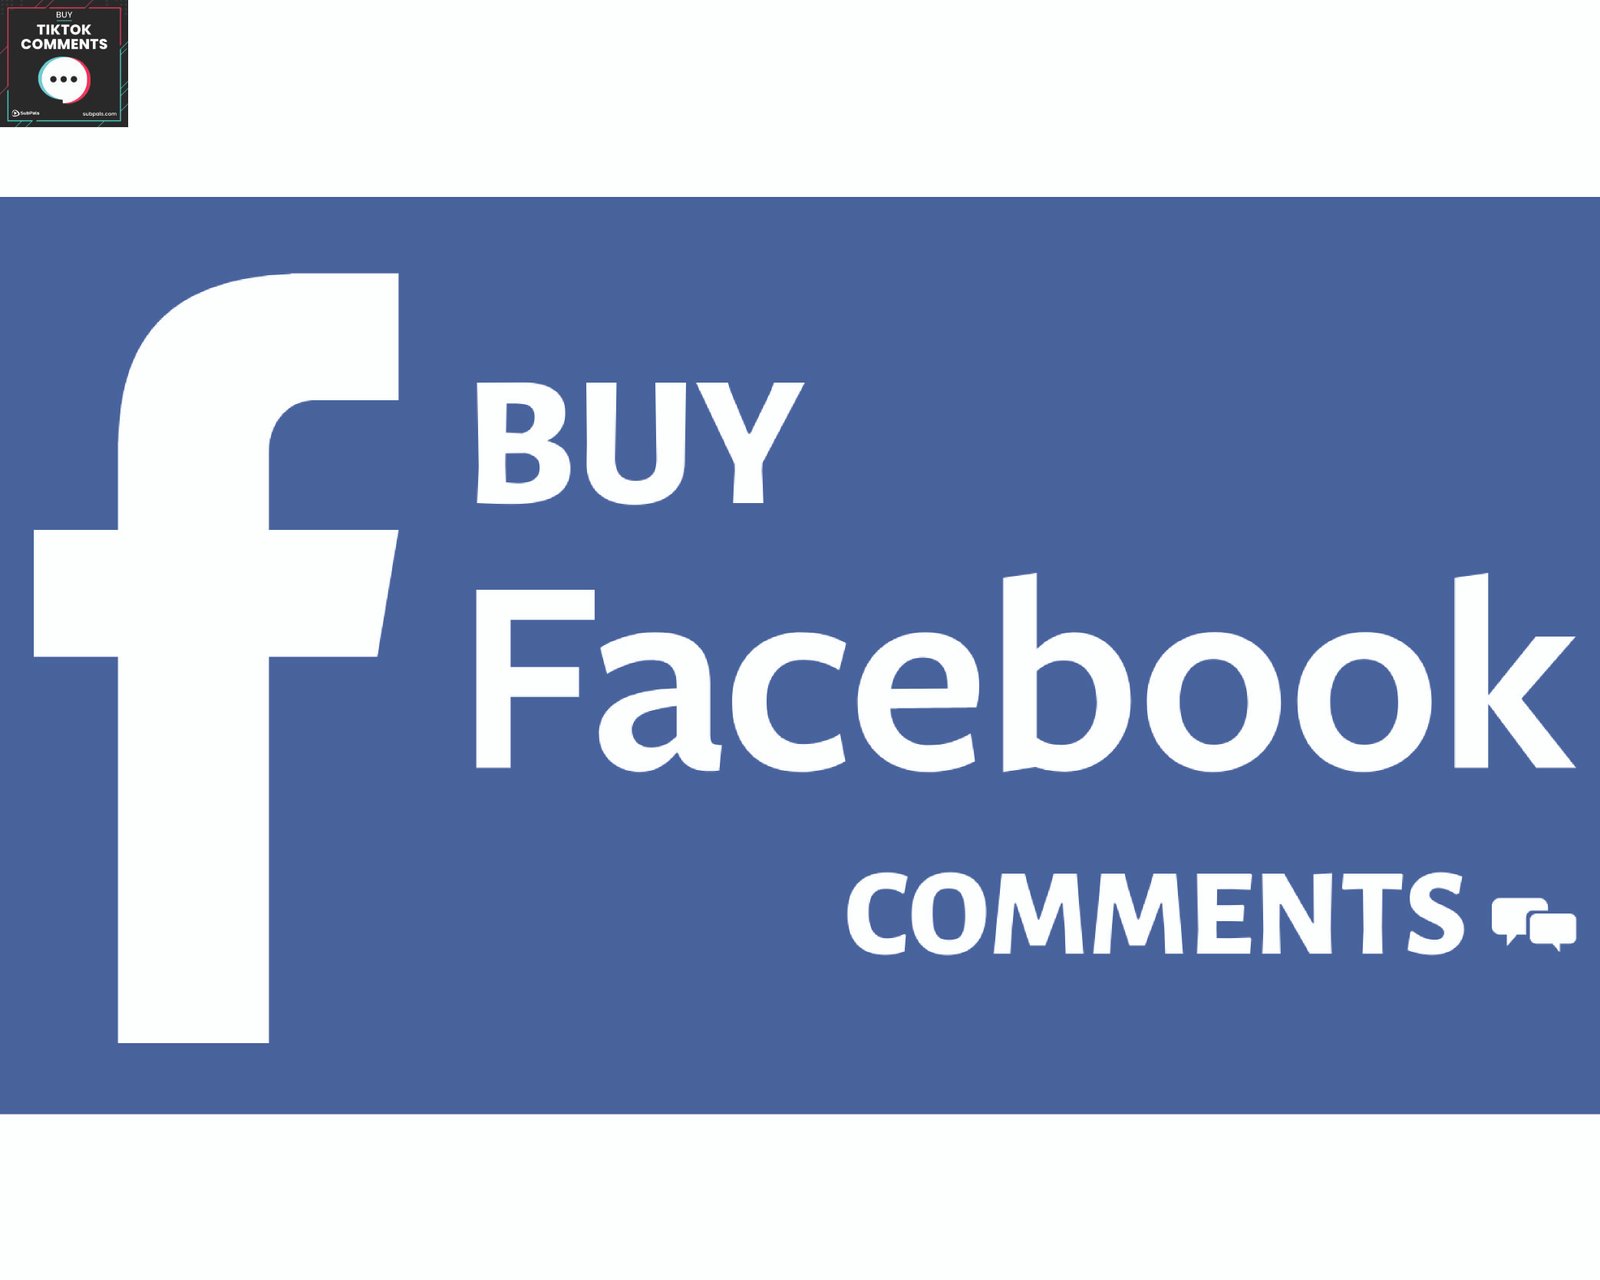 Enhancing Engagement with Purchased Facebook Comments